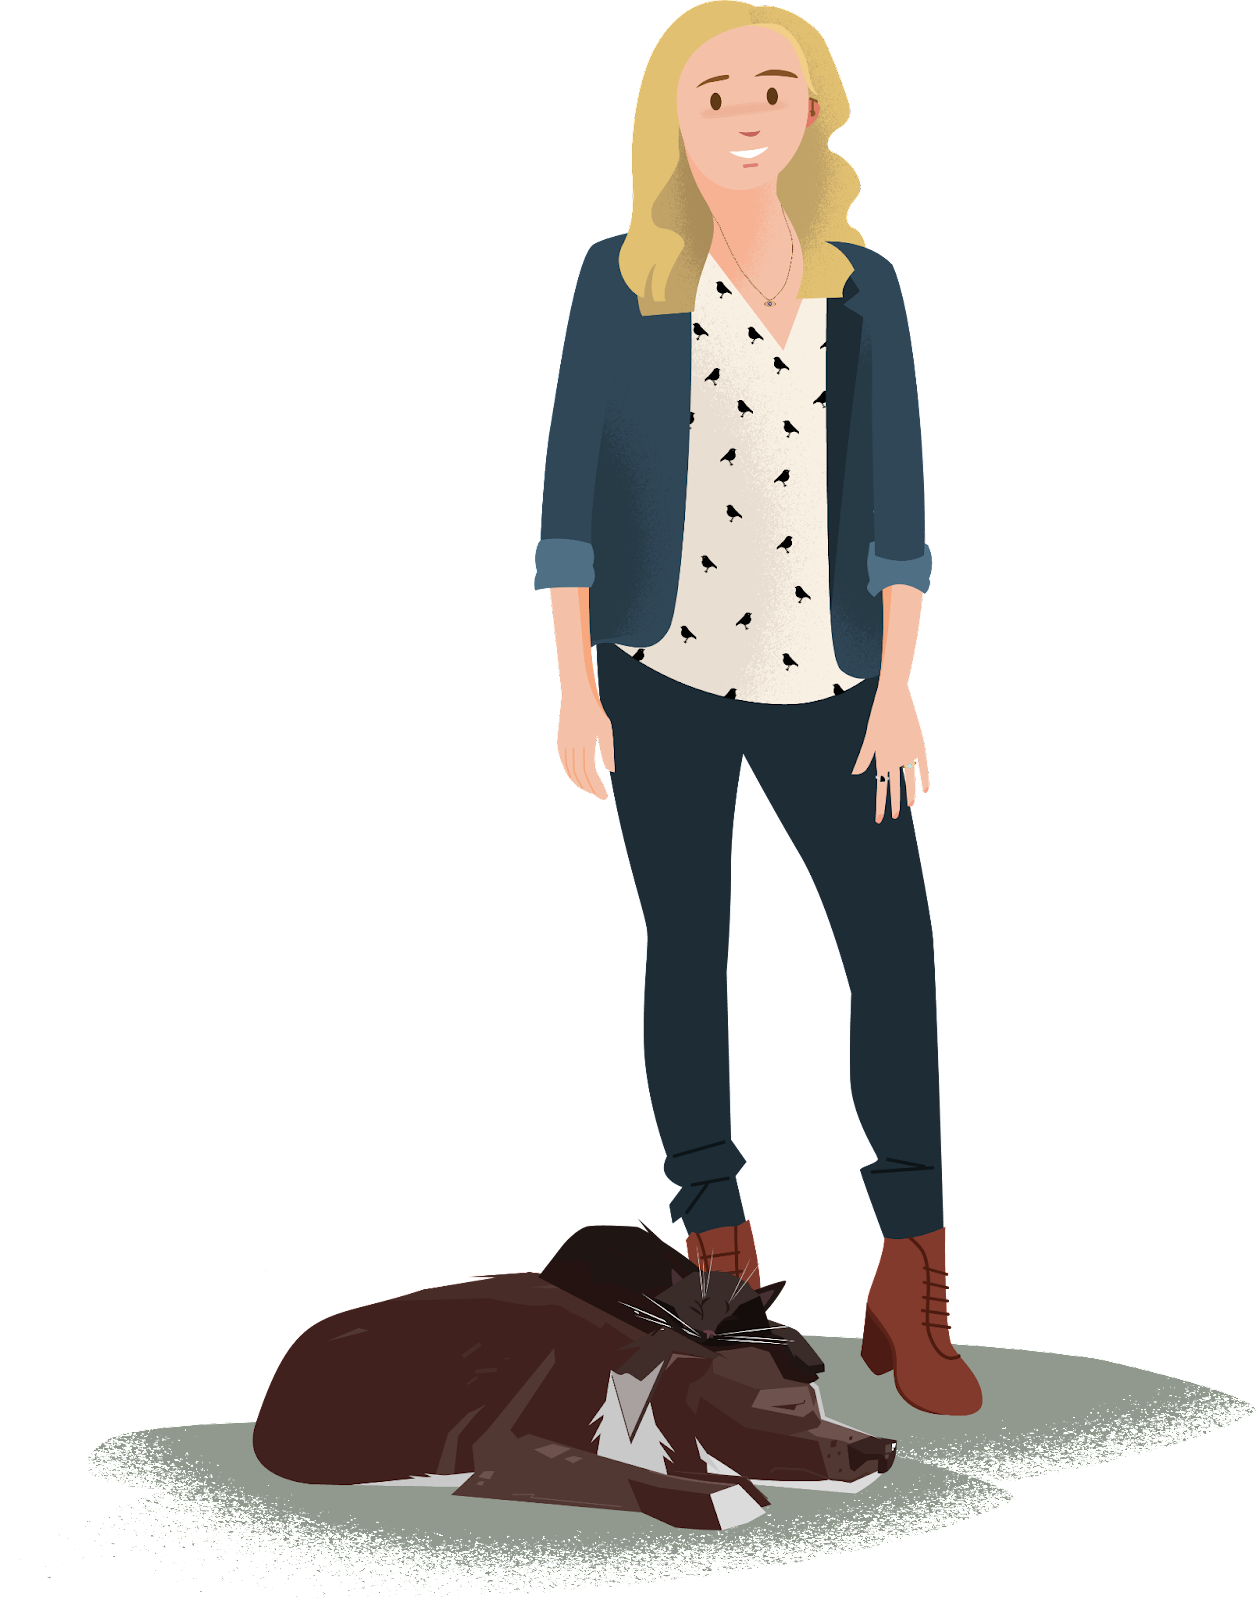  Illustration of Trailblazer Amy Wood, standing with a large brown dog and black cat sleeping together peacefully at her feet. She wears a hearing aid.